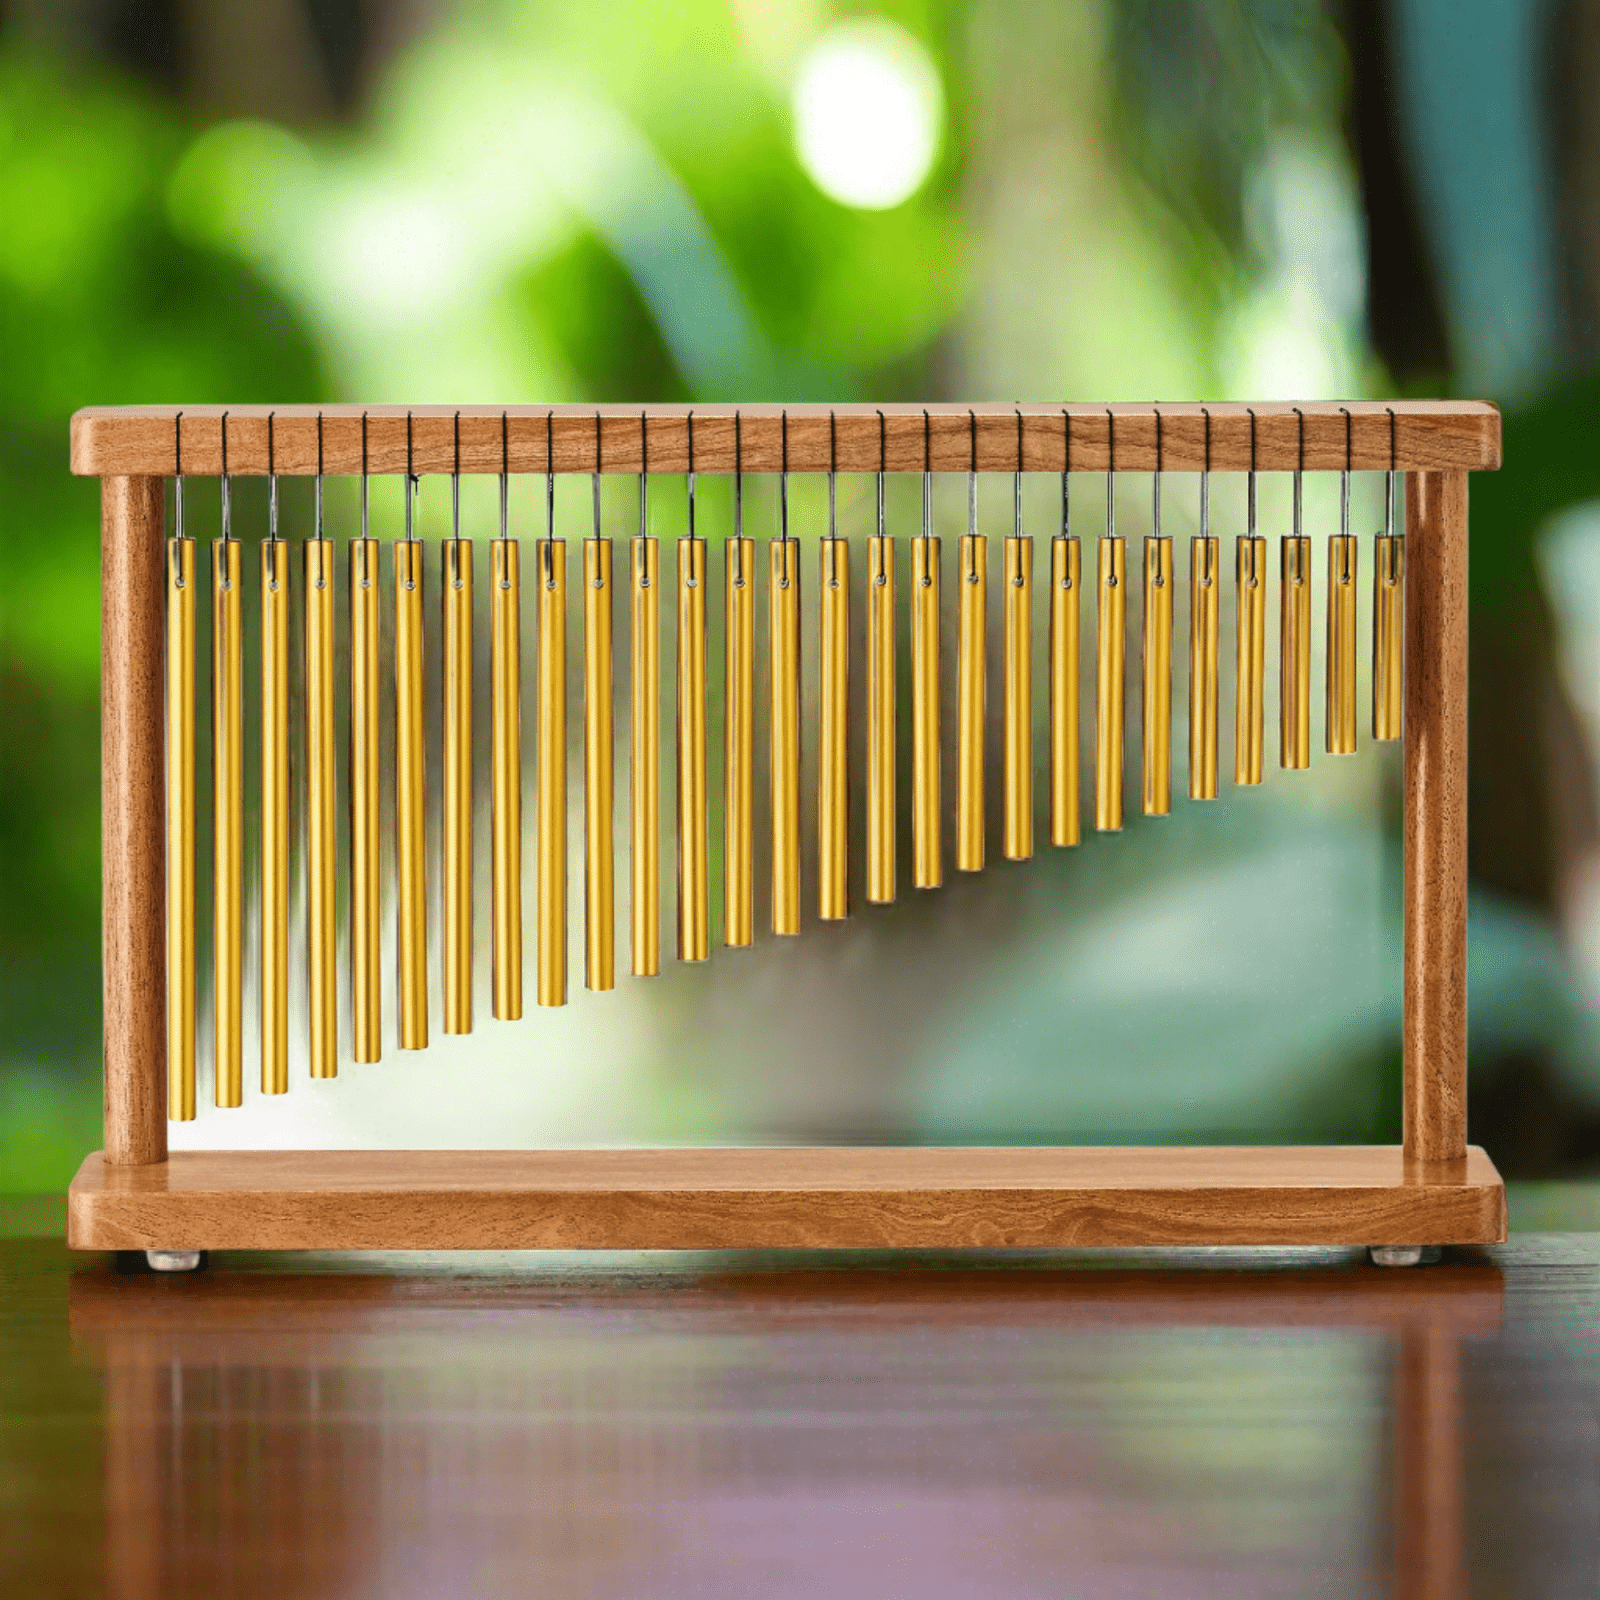 Table Golden Pro Chimes 27 Notes for Sound Baths - Chimes